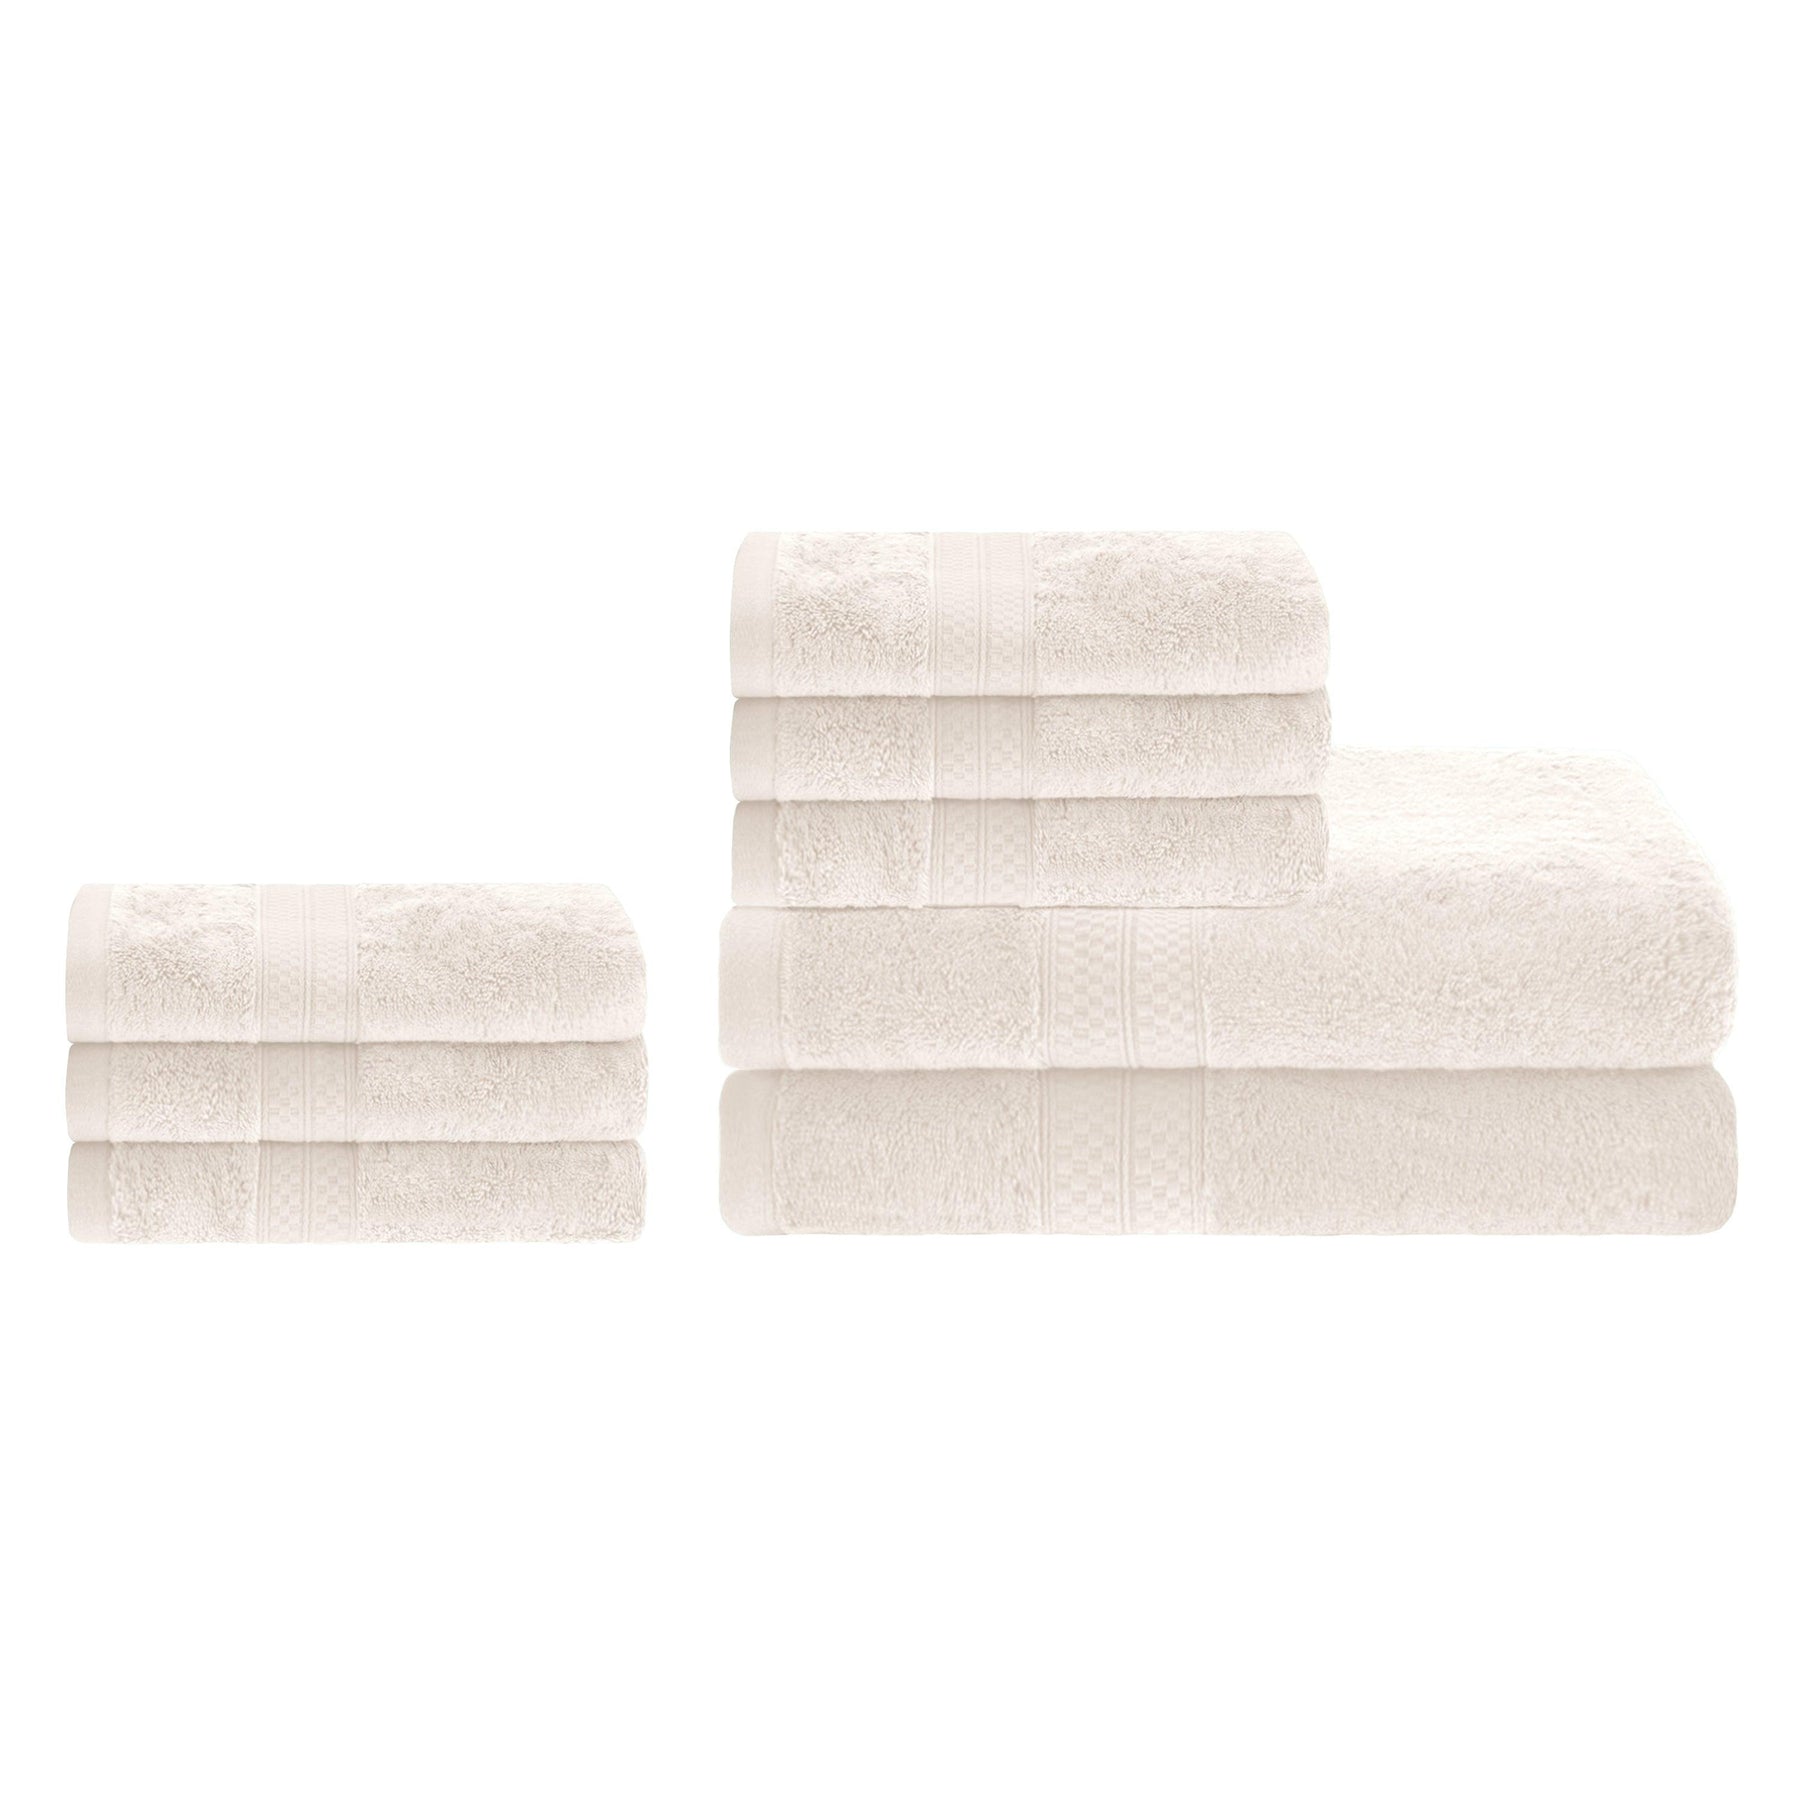 Ultra-Soft Hypoallergenic Rayon from Bamboo Cotton Blend Bath and Hand Towel Set -Ivory